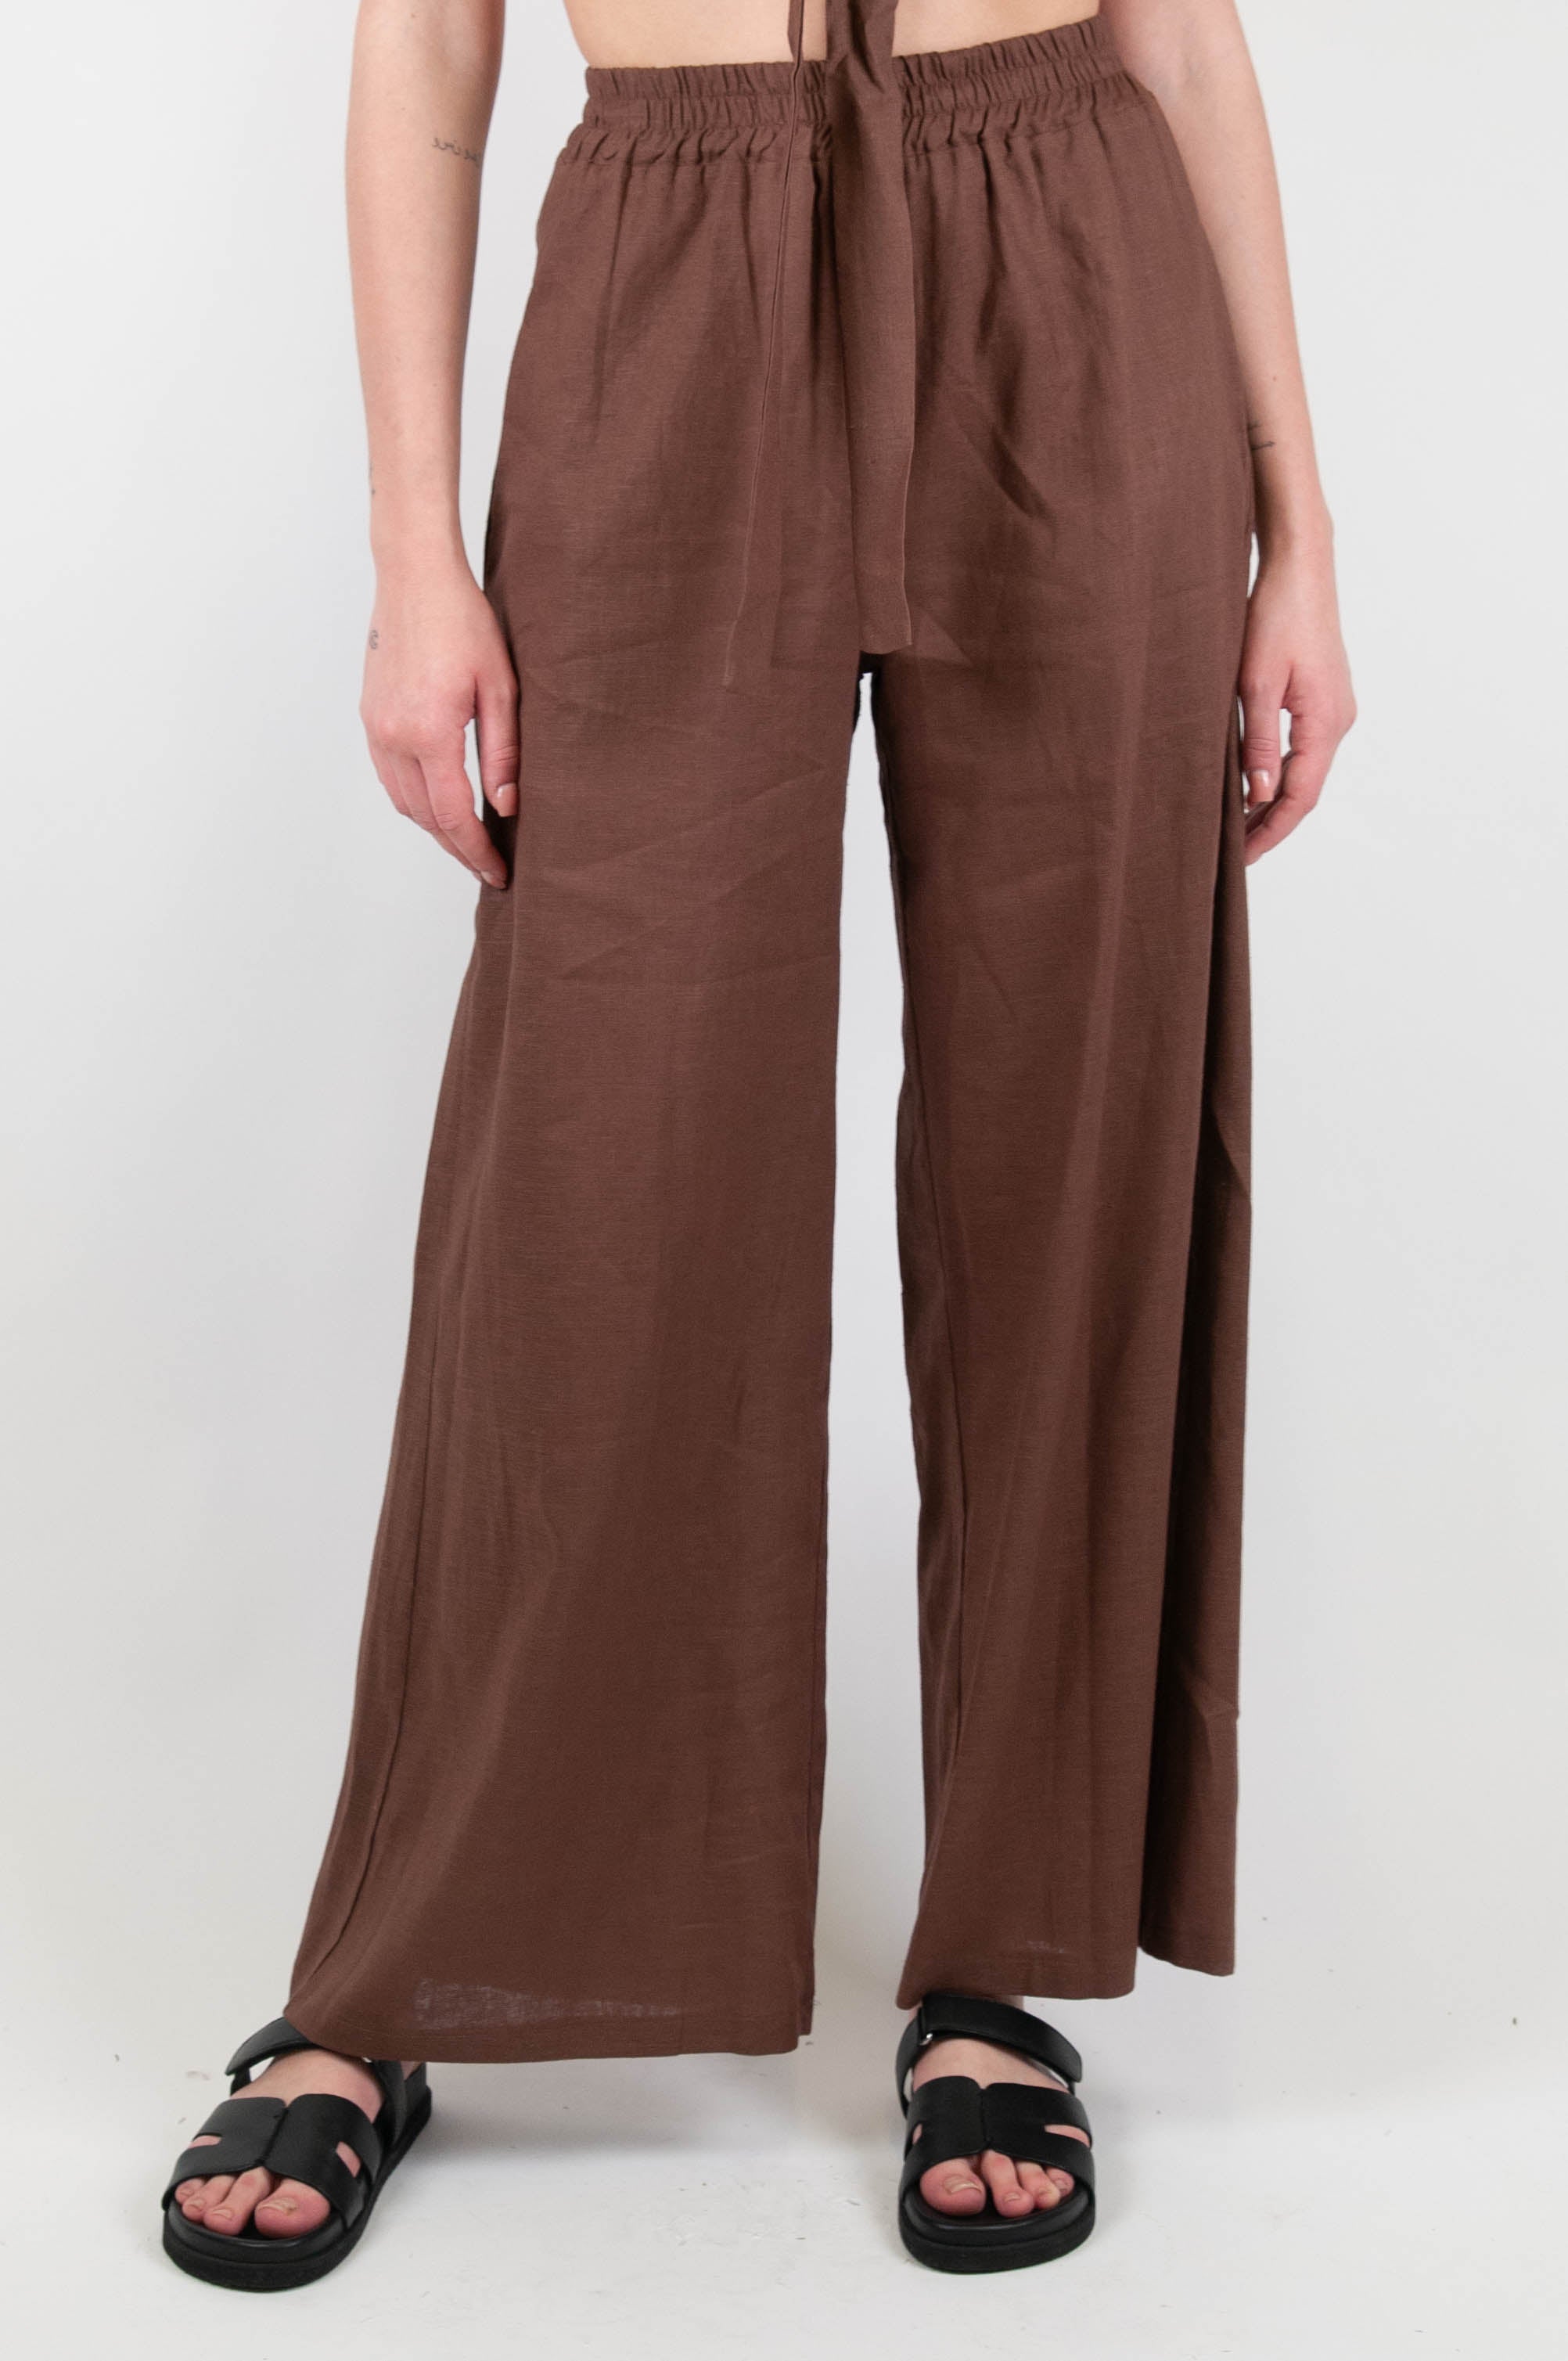 Haveone - Palazzo trousers in linen blend with elastic waist